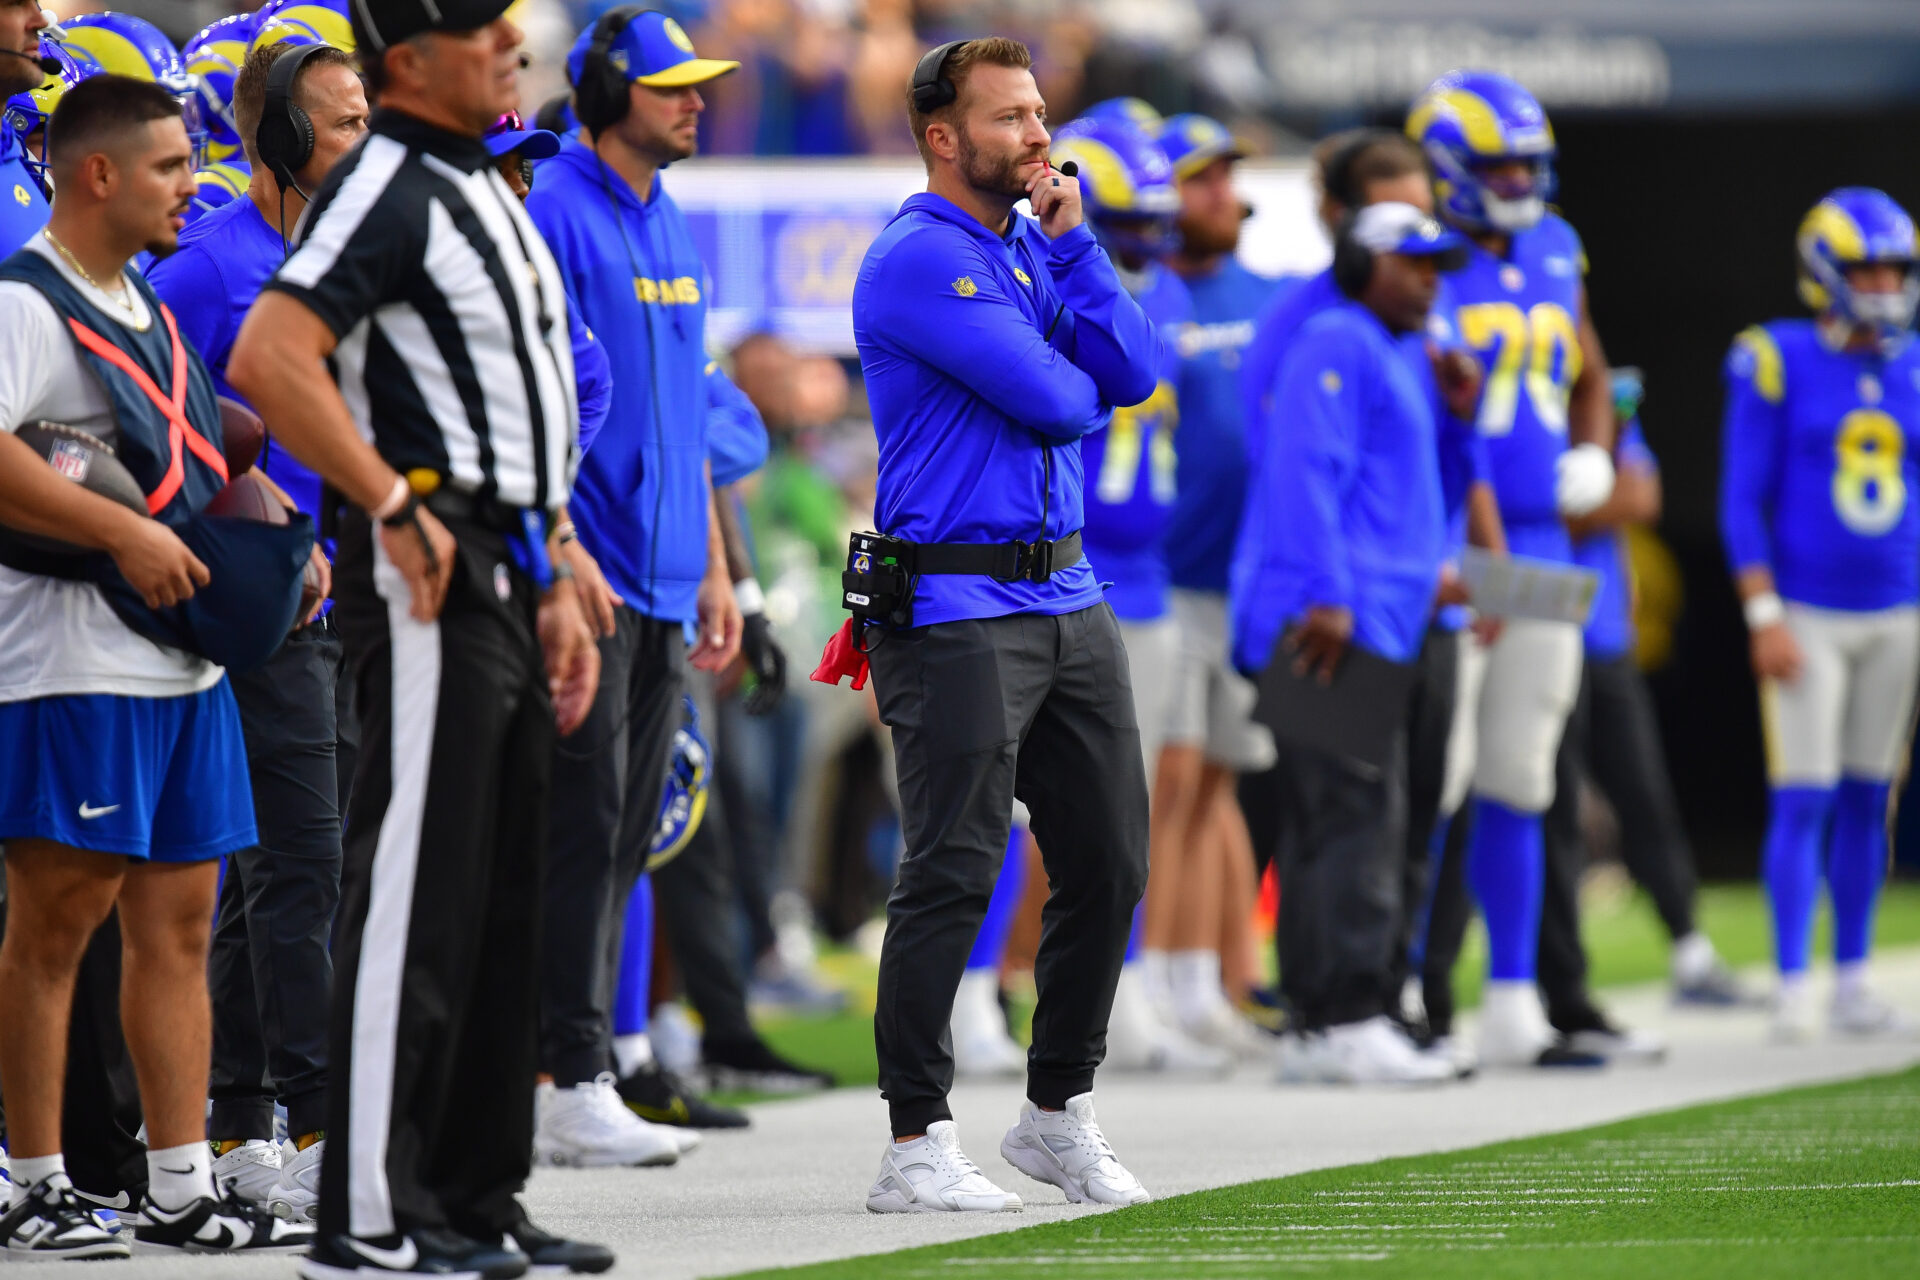 Sean McVay stands on the sideline with his hand on his chin